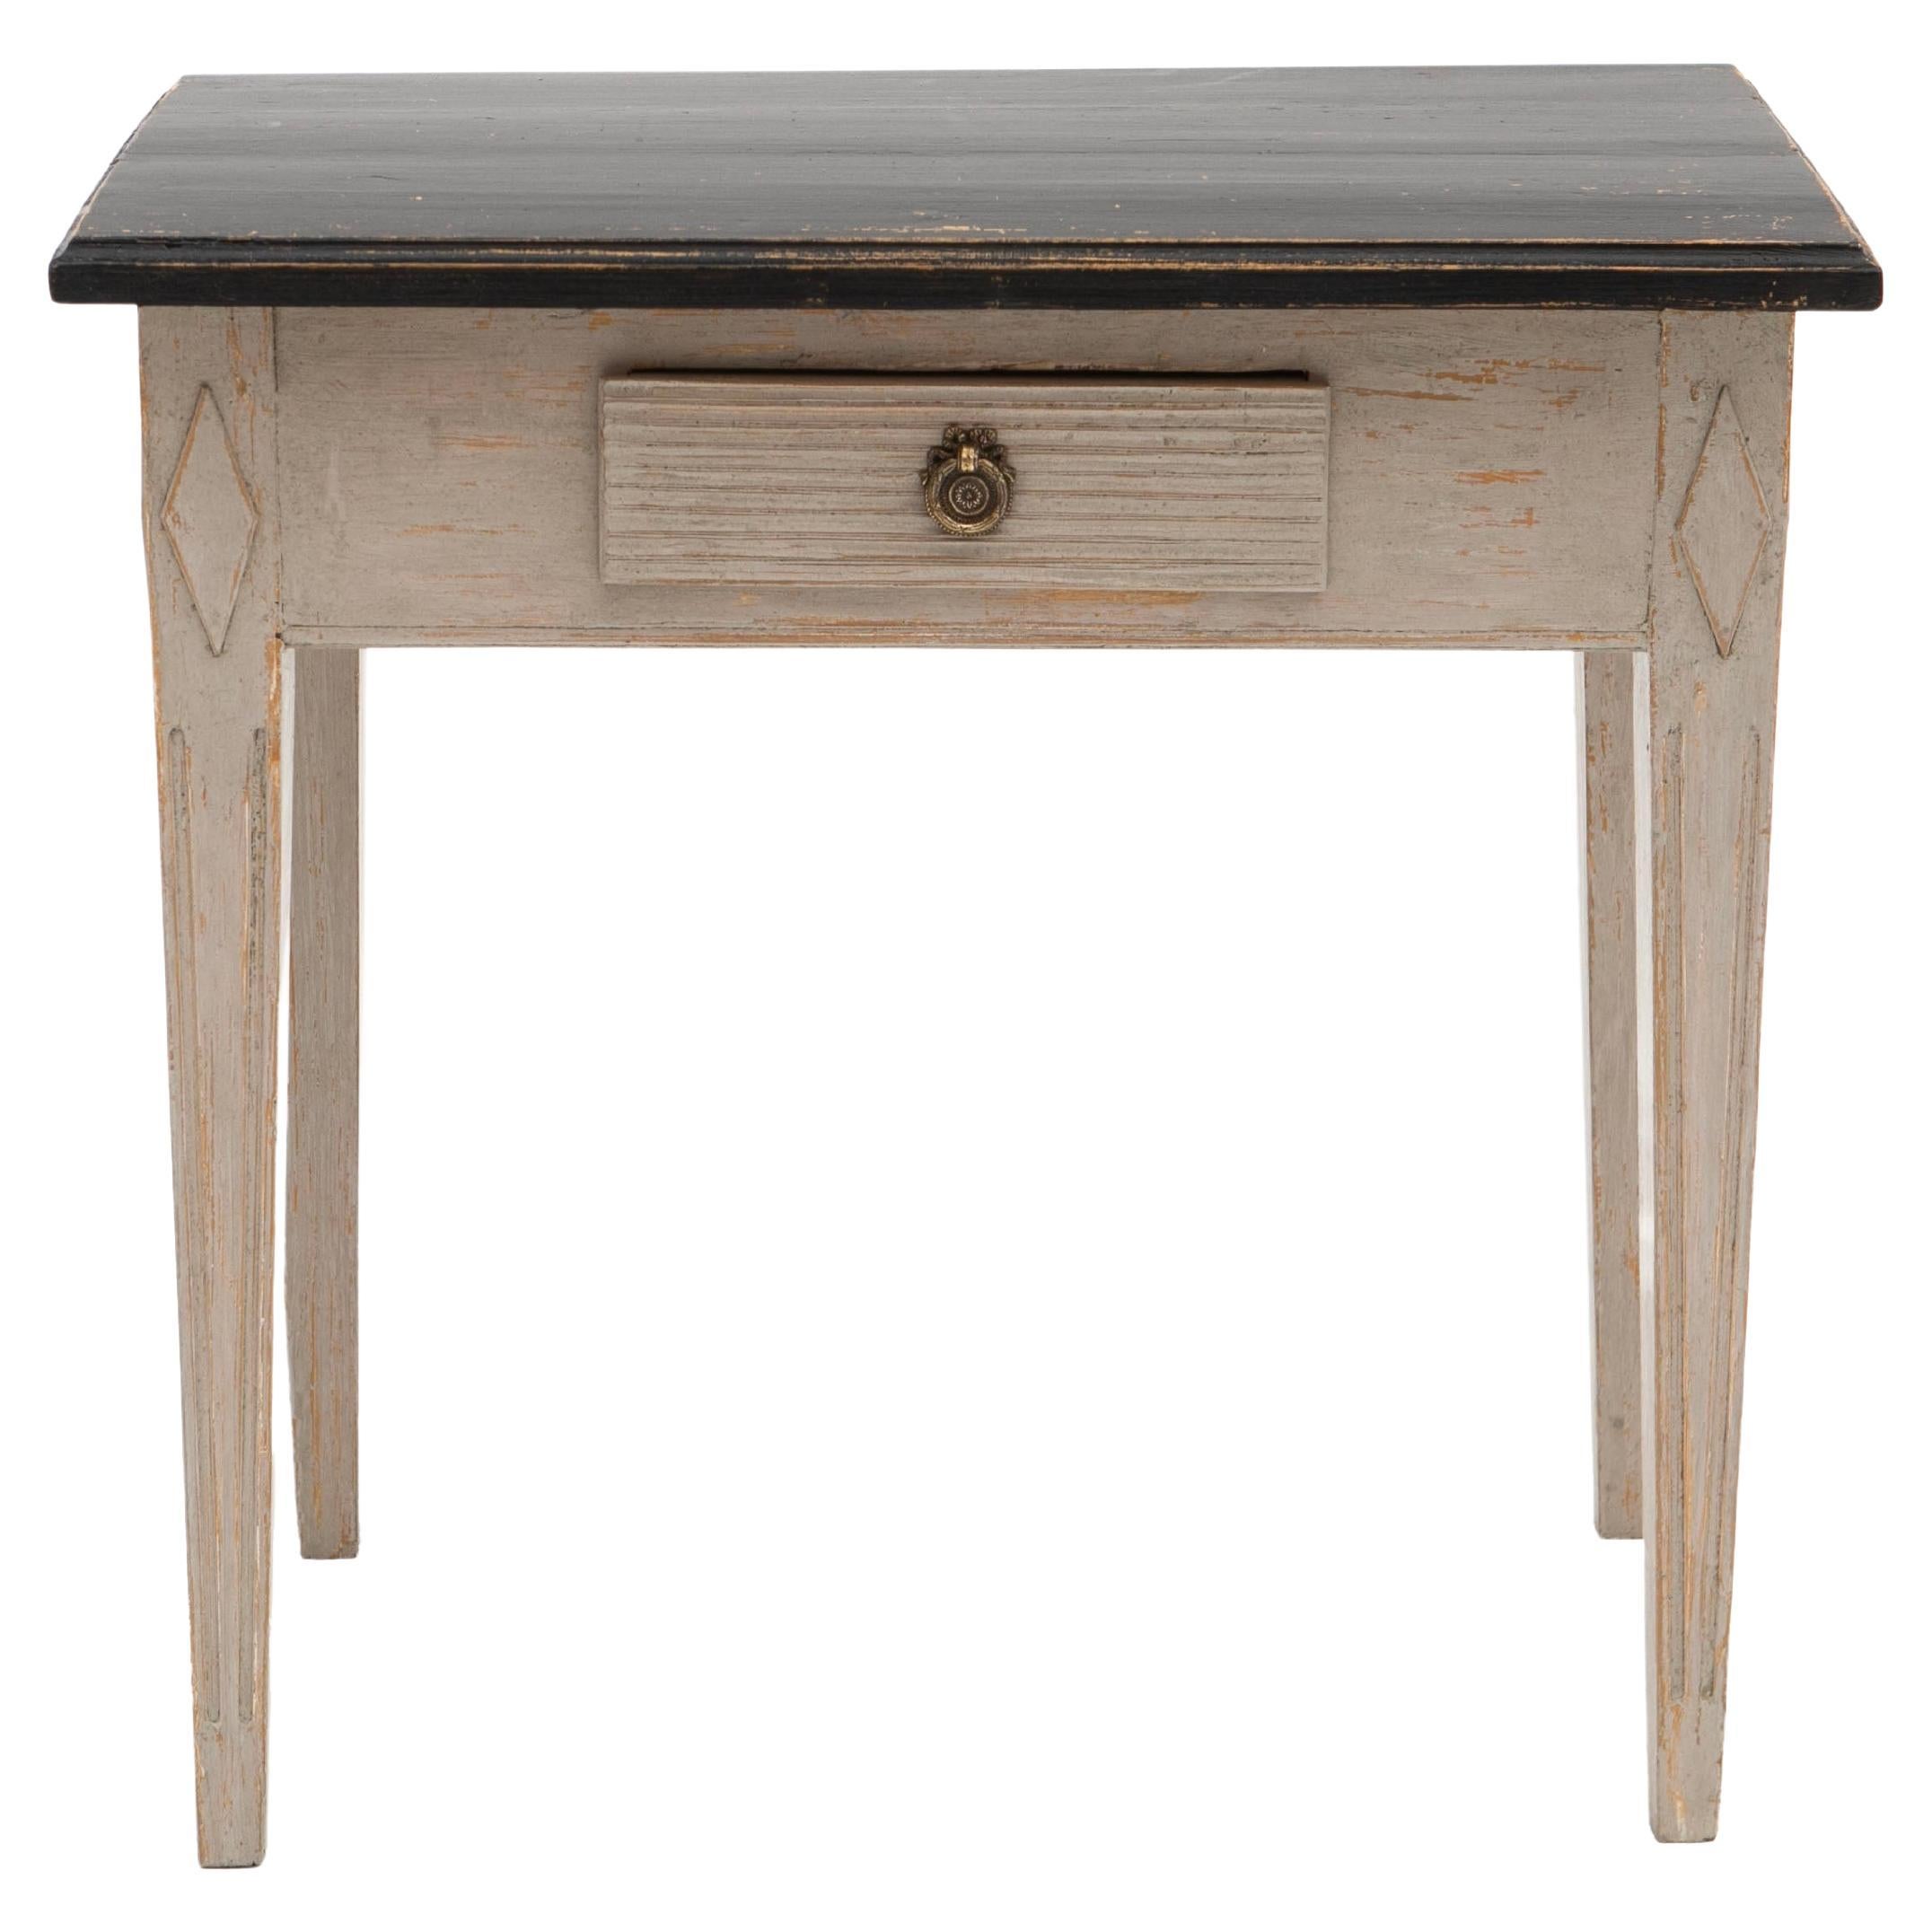 Antique Swedish Early 19th Century Gustavian Console Table For Sale